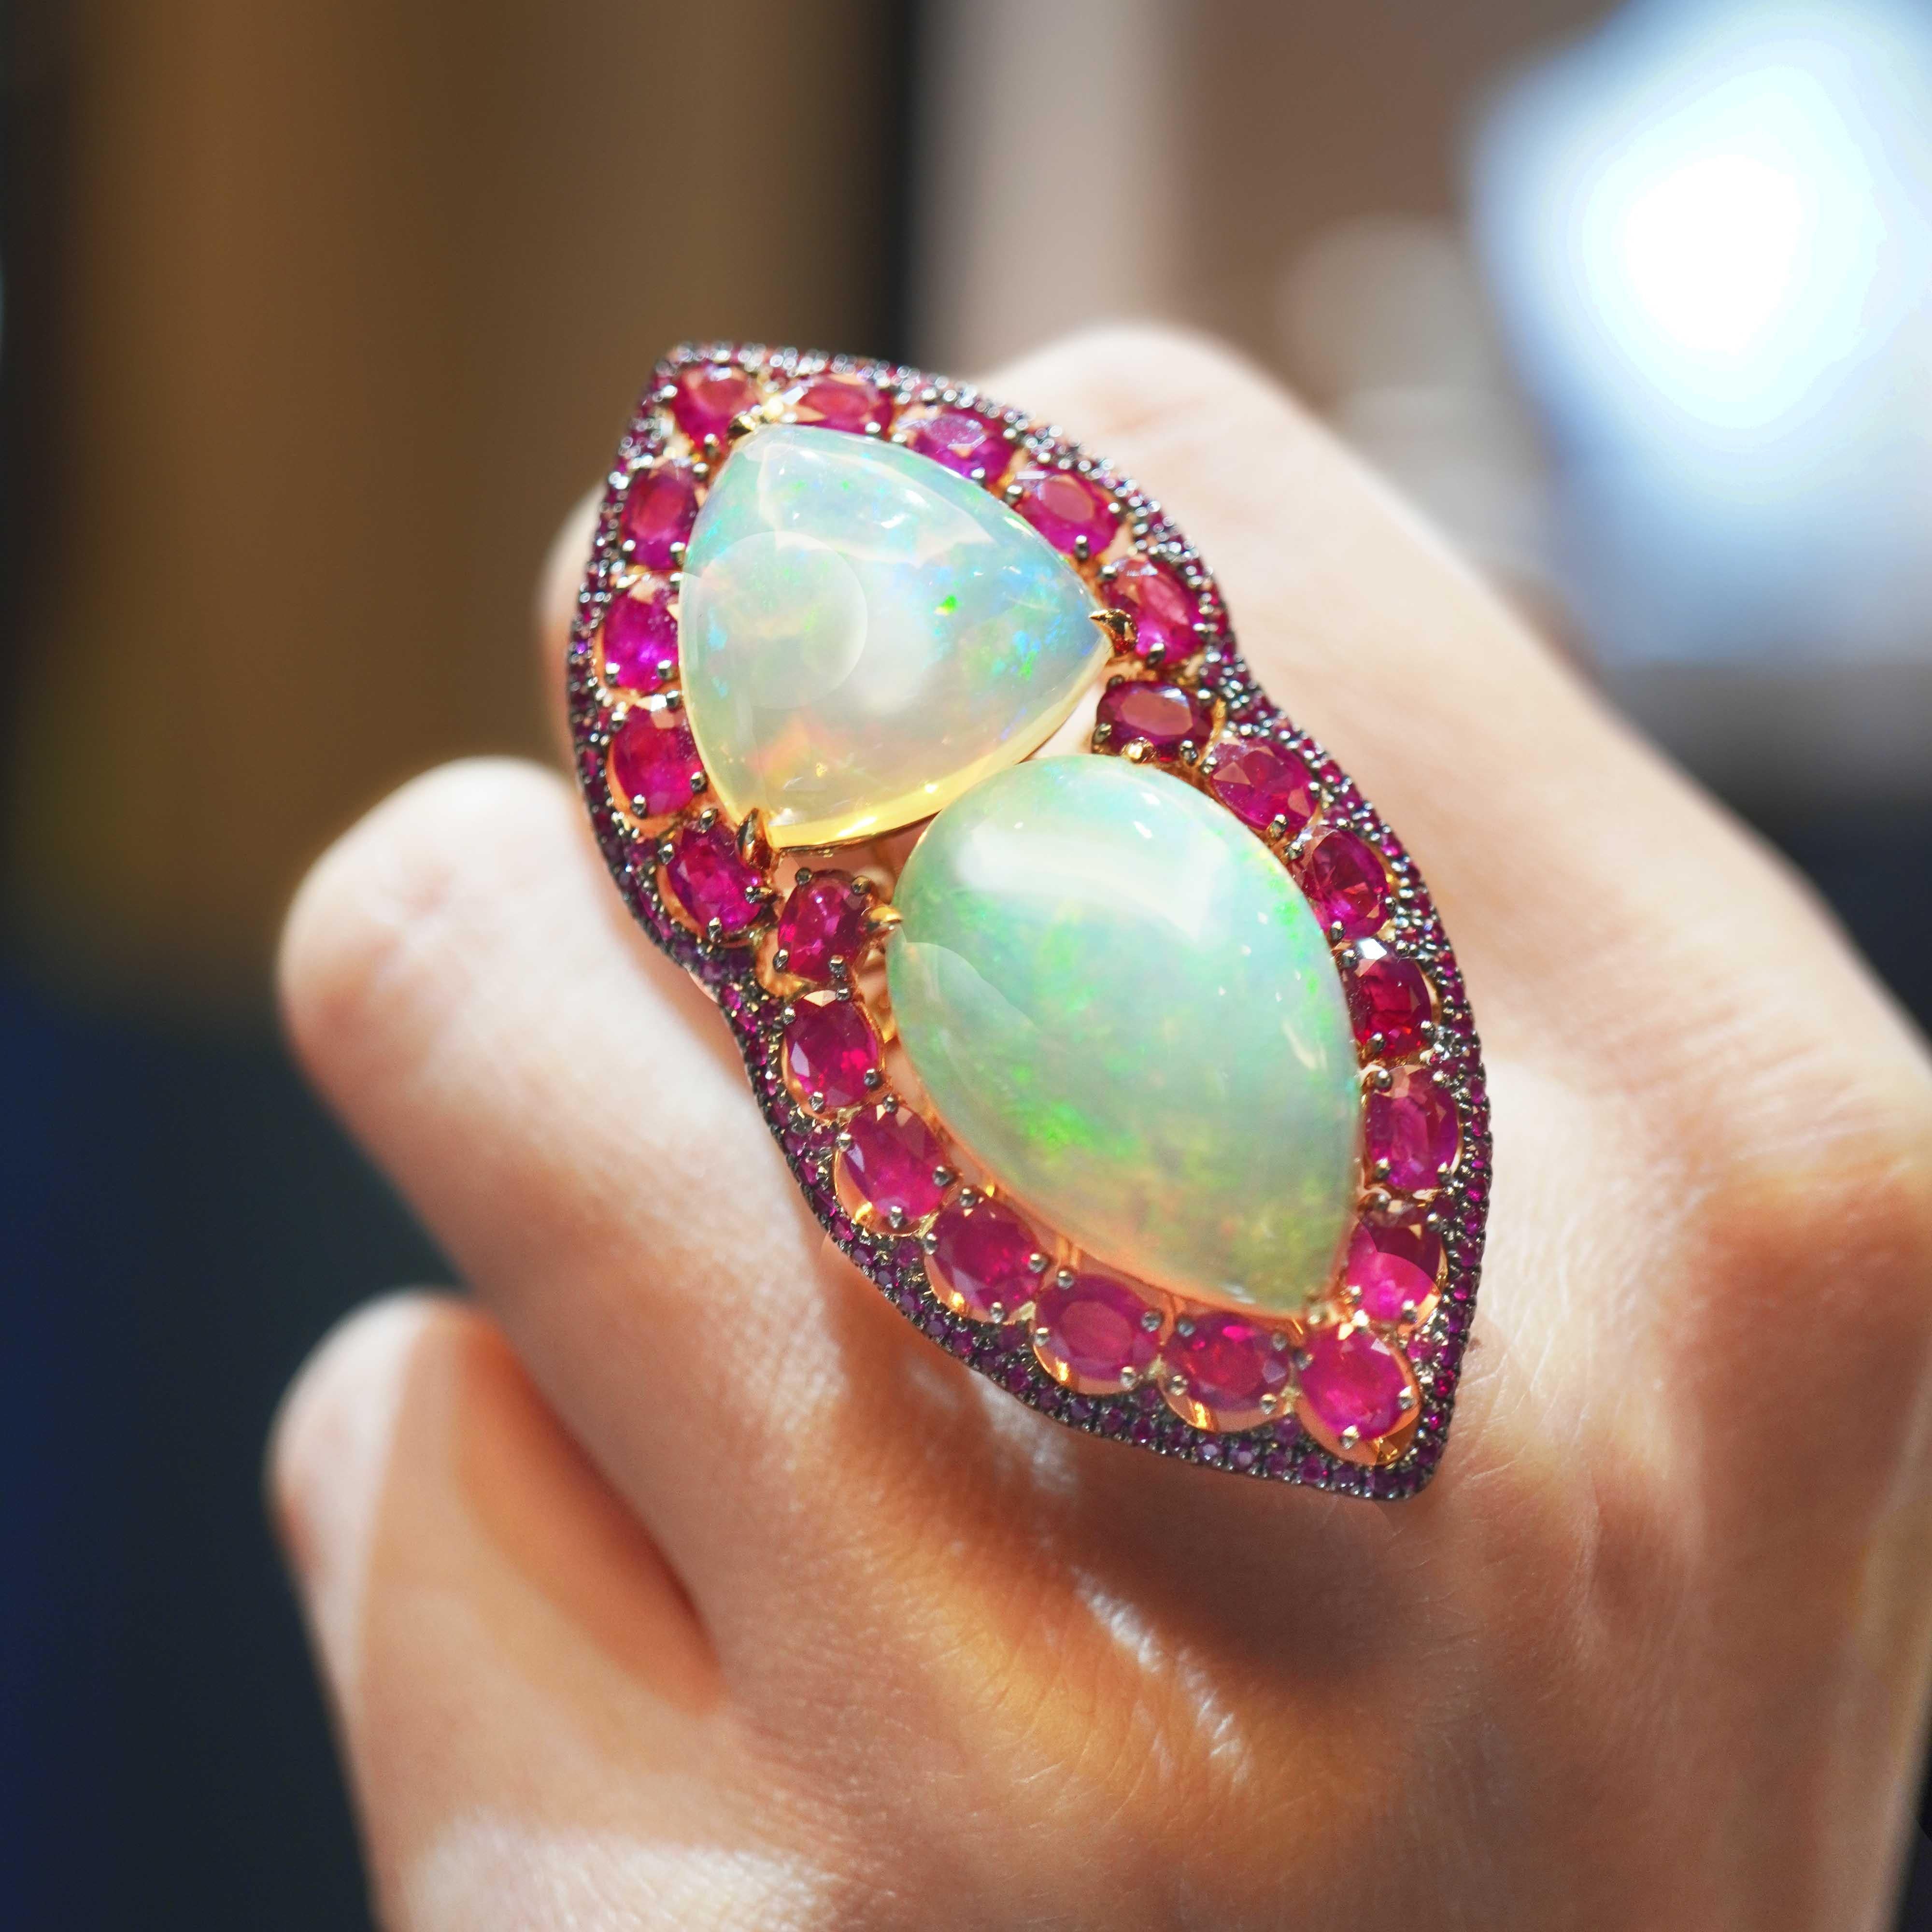 An artful combination of 14.90 carat of Ethiopian Opal and 5.67 carat of vivid red round Burma Ruby is set together in this One Of A Kind Cocktail ring. The ring has been made in 18K gold and is hand made. The total weight of 18K gold is 19.16